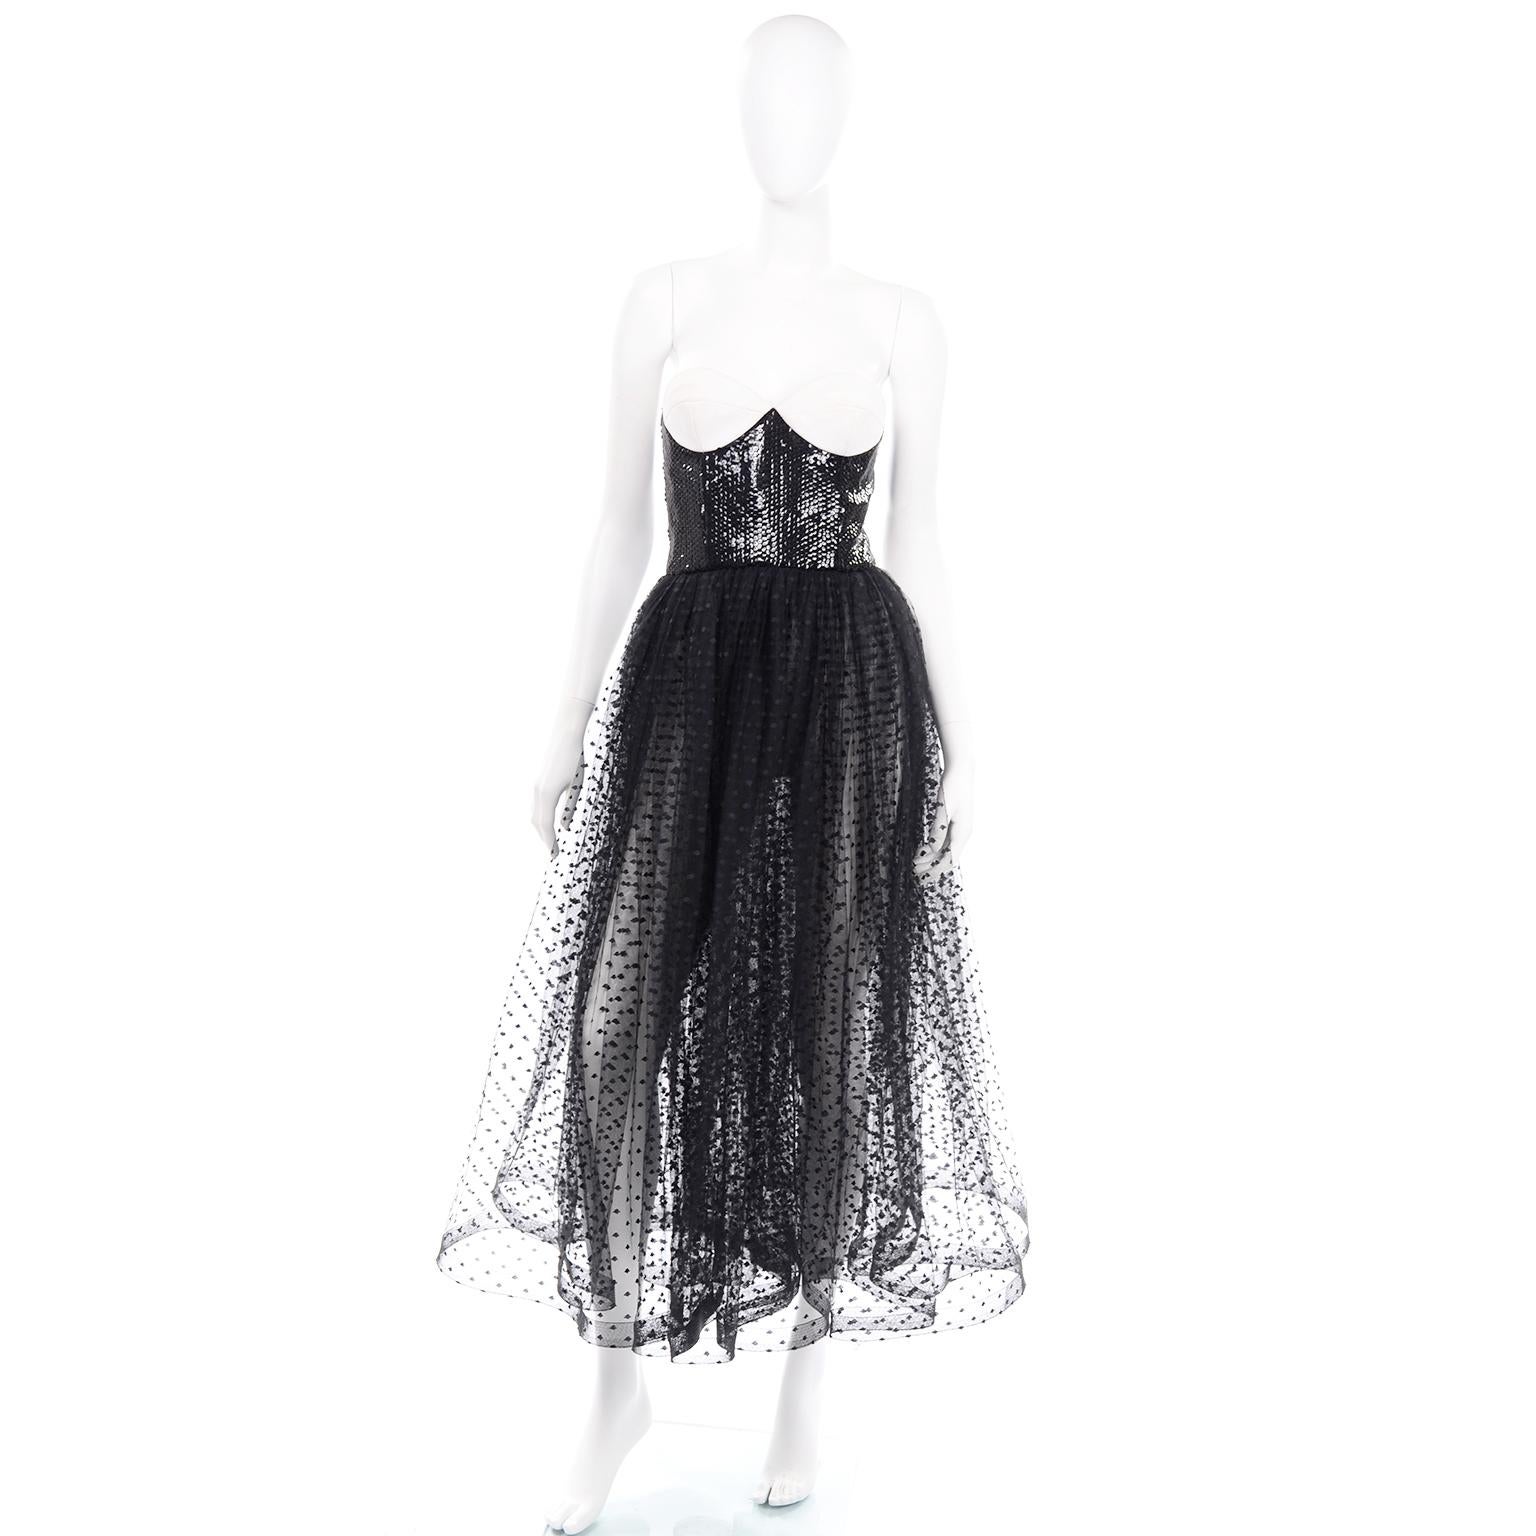 This is a dramatic vintage Bill Blass dress with a fitted bustier style bodice that is covered in black sequins up to the white cotton bra cups. The full skirt has heavy pleating, creating the illusion of a double layered skirt. The white ribbed